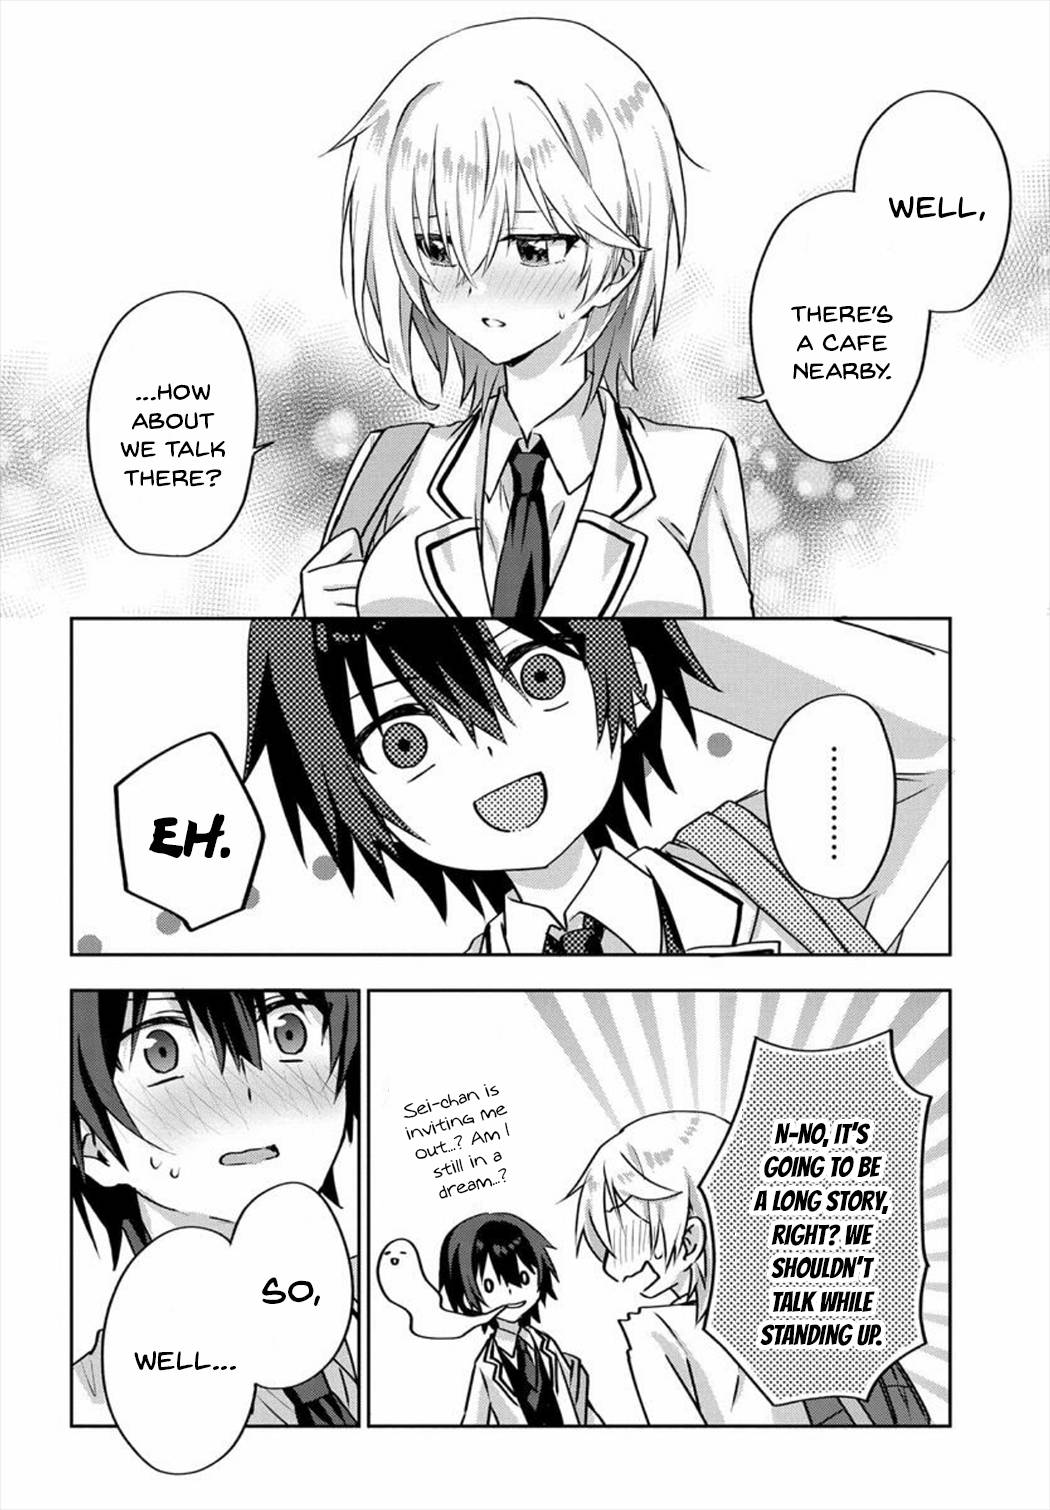 Since I’Ve Entered The World Of Romantic Comedy Manga, I’Ll Do My Best To Make The Losing Heroine Happy - chapter 3.5 - #6